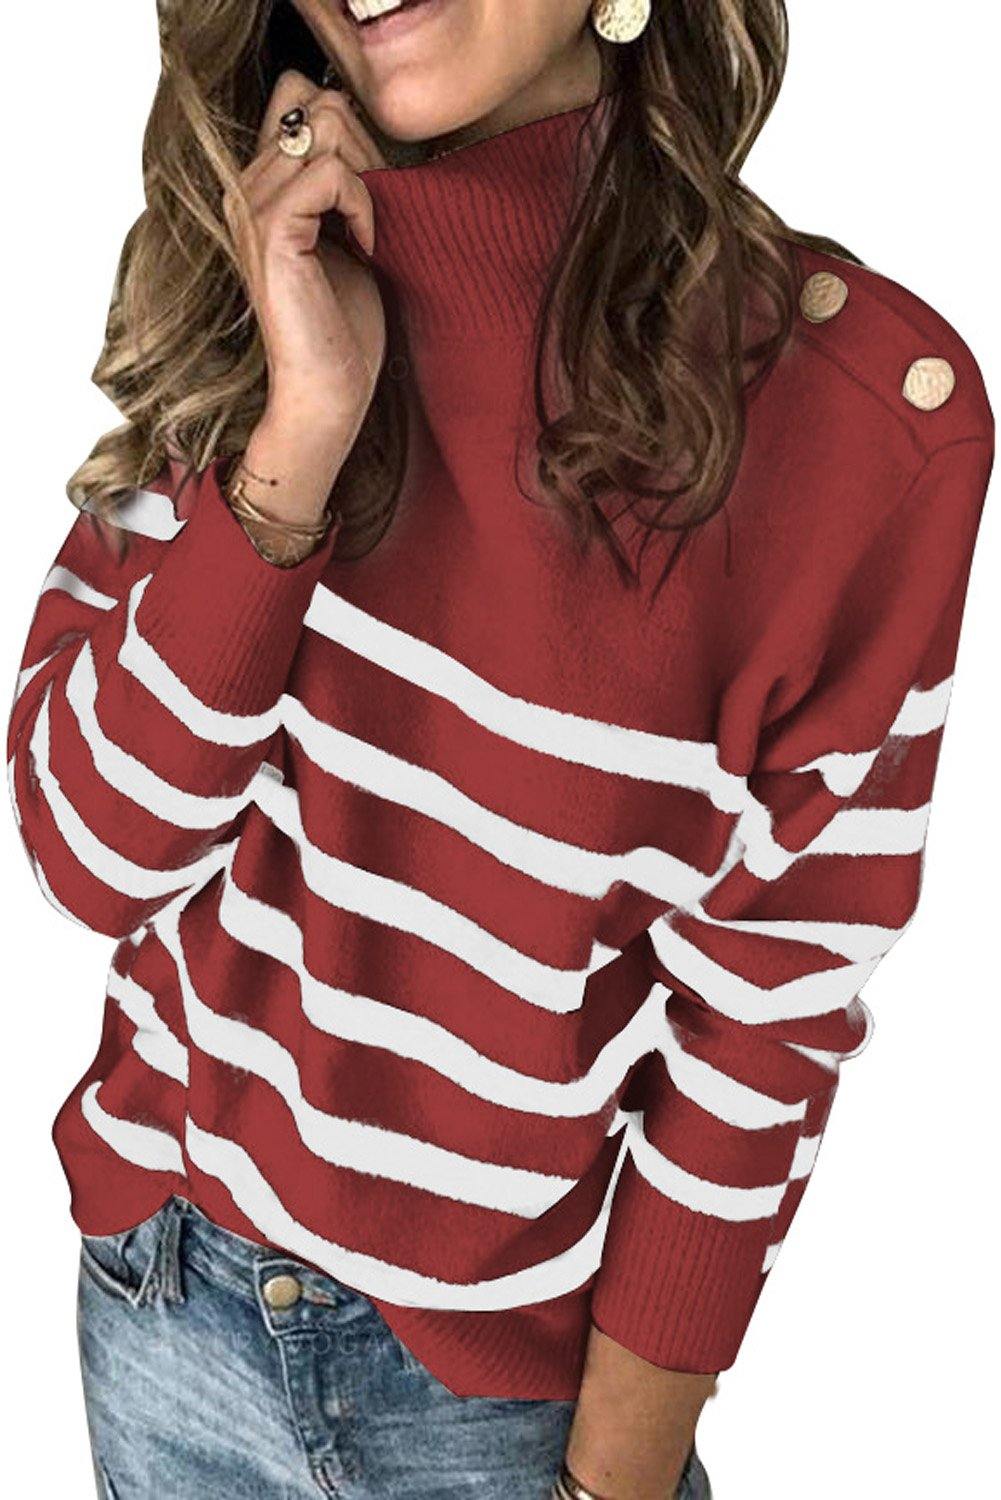 Striped Turtleneck Sweater with Buttons - L & M Kee, LLC